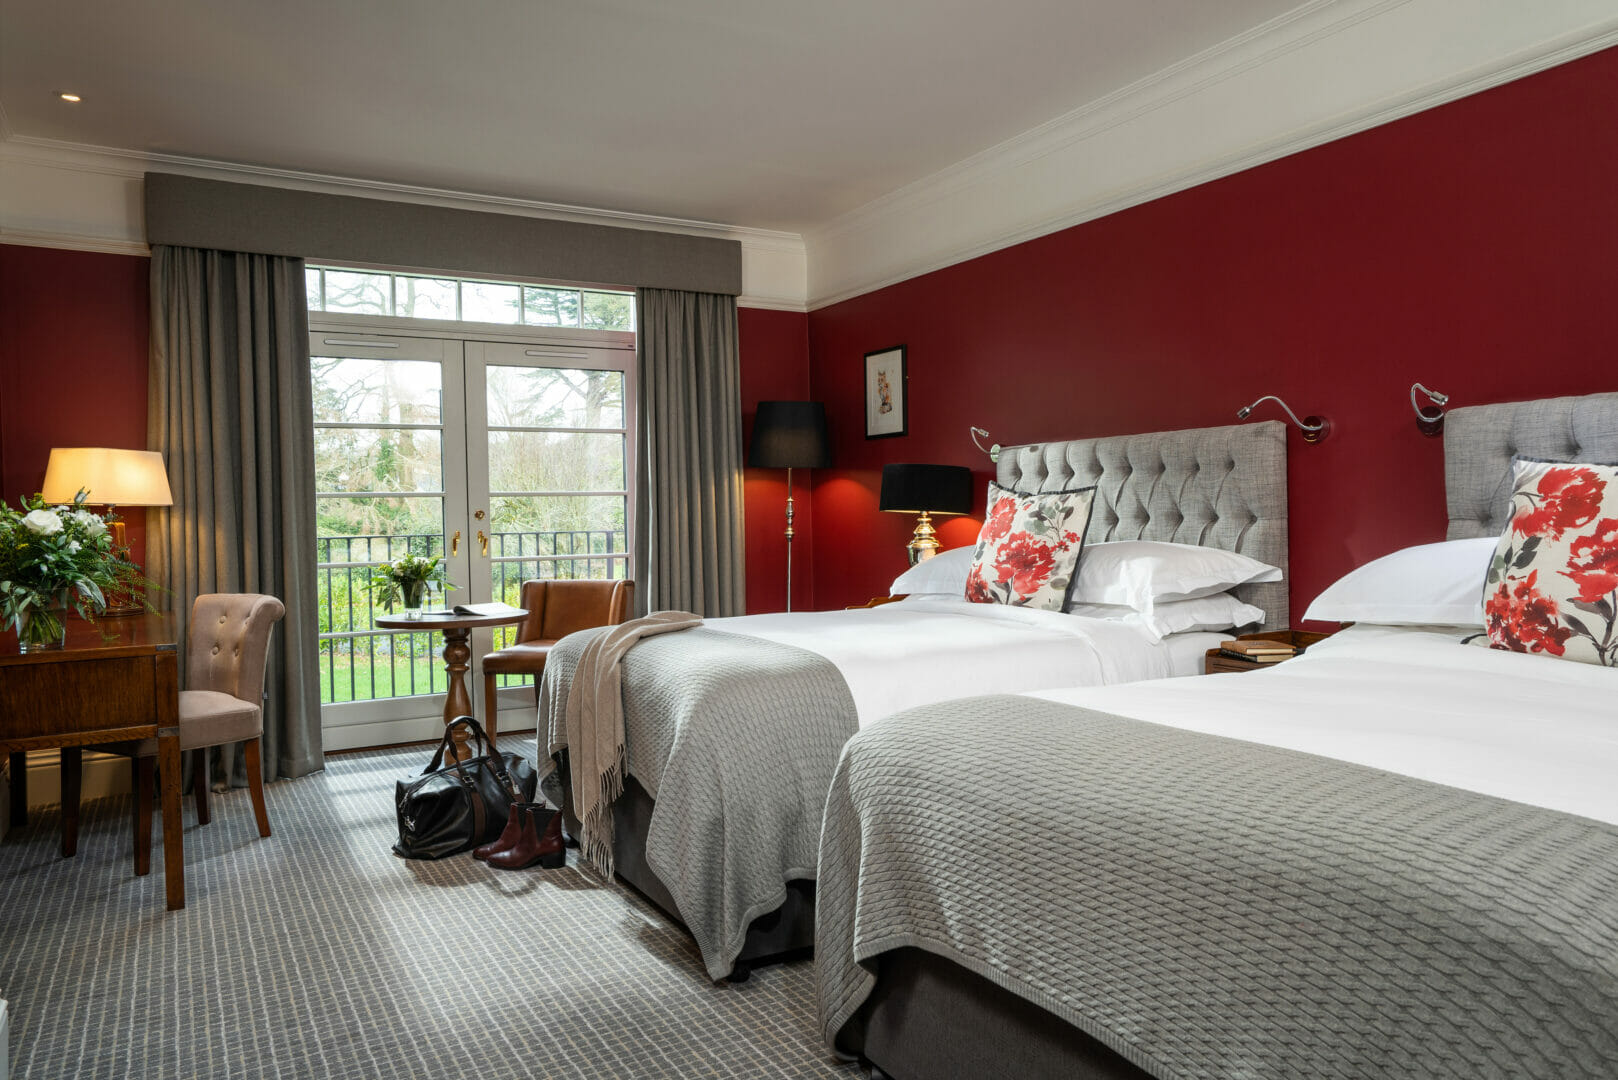 AUTOGRAPH COLLECTION HOTELS WELCOMES MOUNT JULIET ESTATE KILKENNY TO ITS PORTFOLIO OF EXTRAORDINARY INDEPENDENT HOTELS @autographhotels